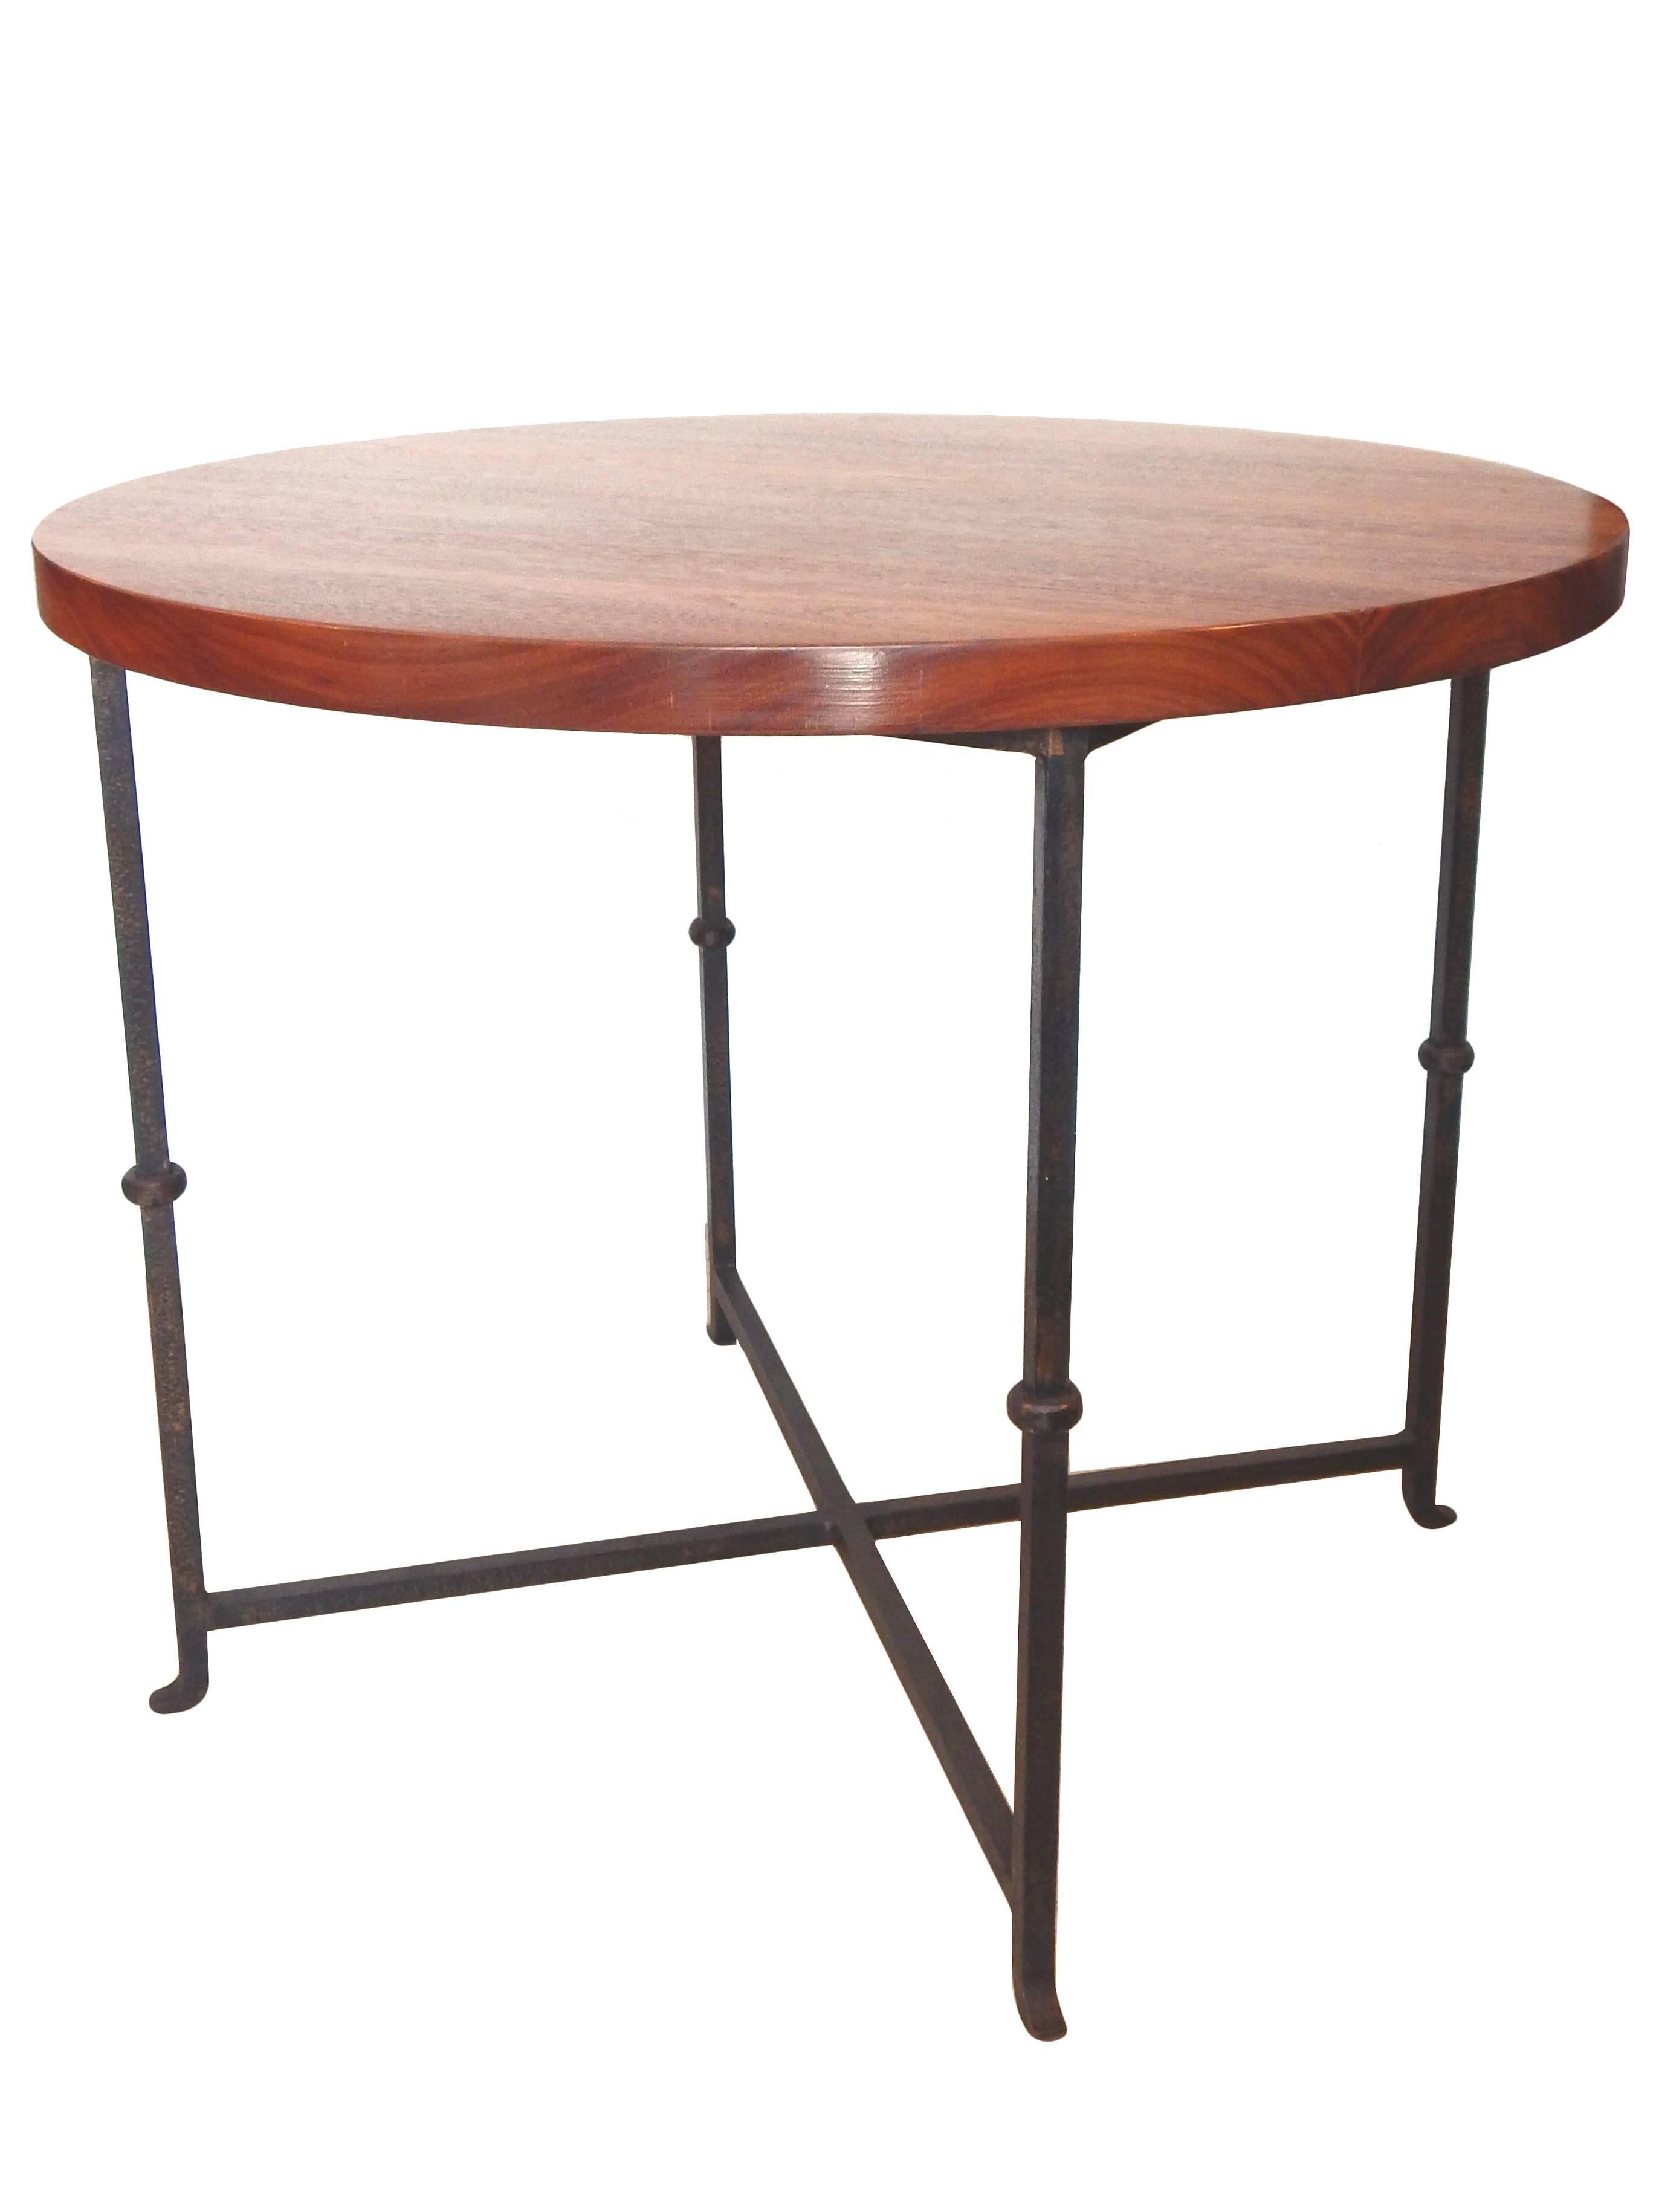 Round table with iron base with refinished wood top.